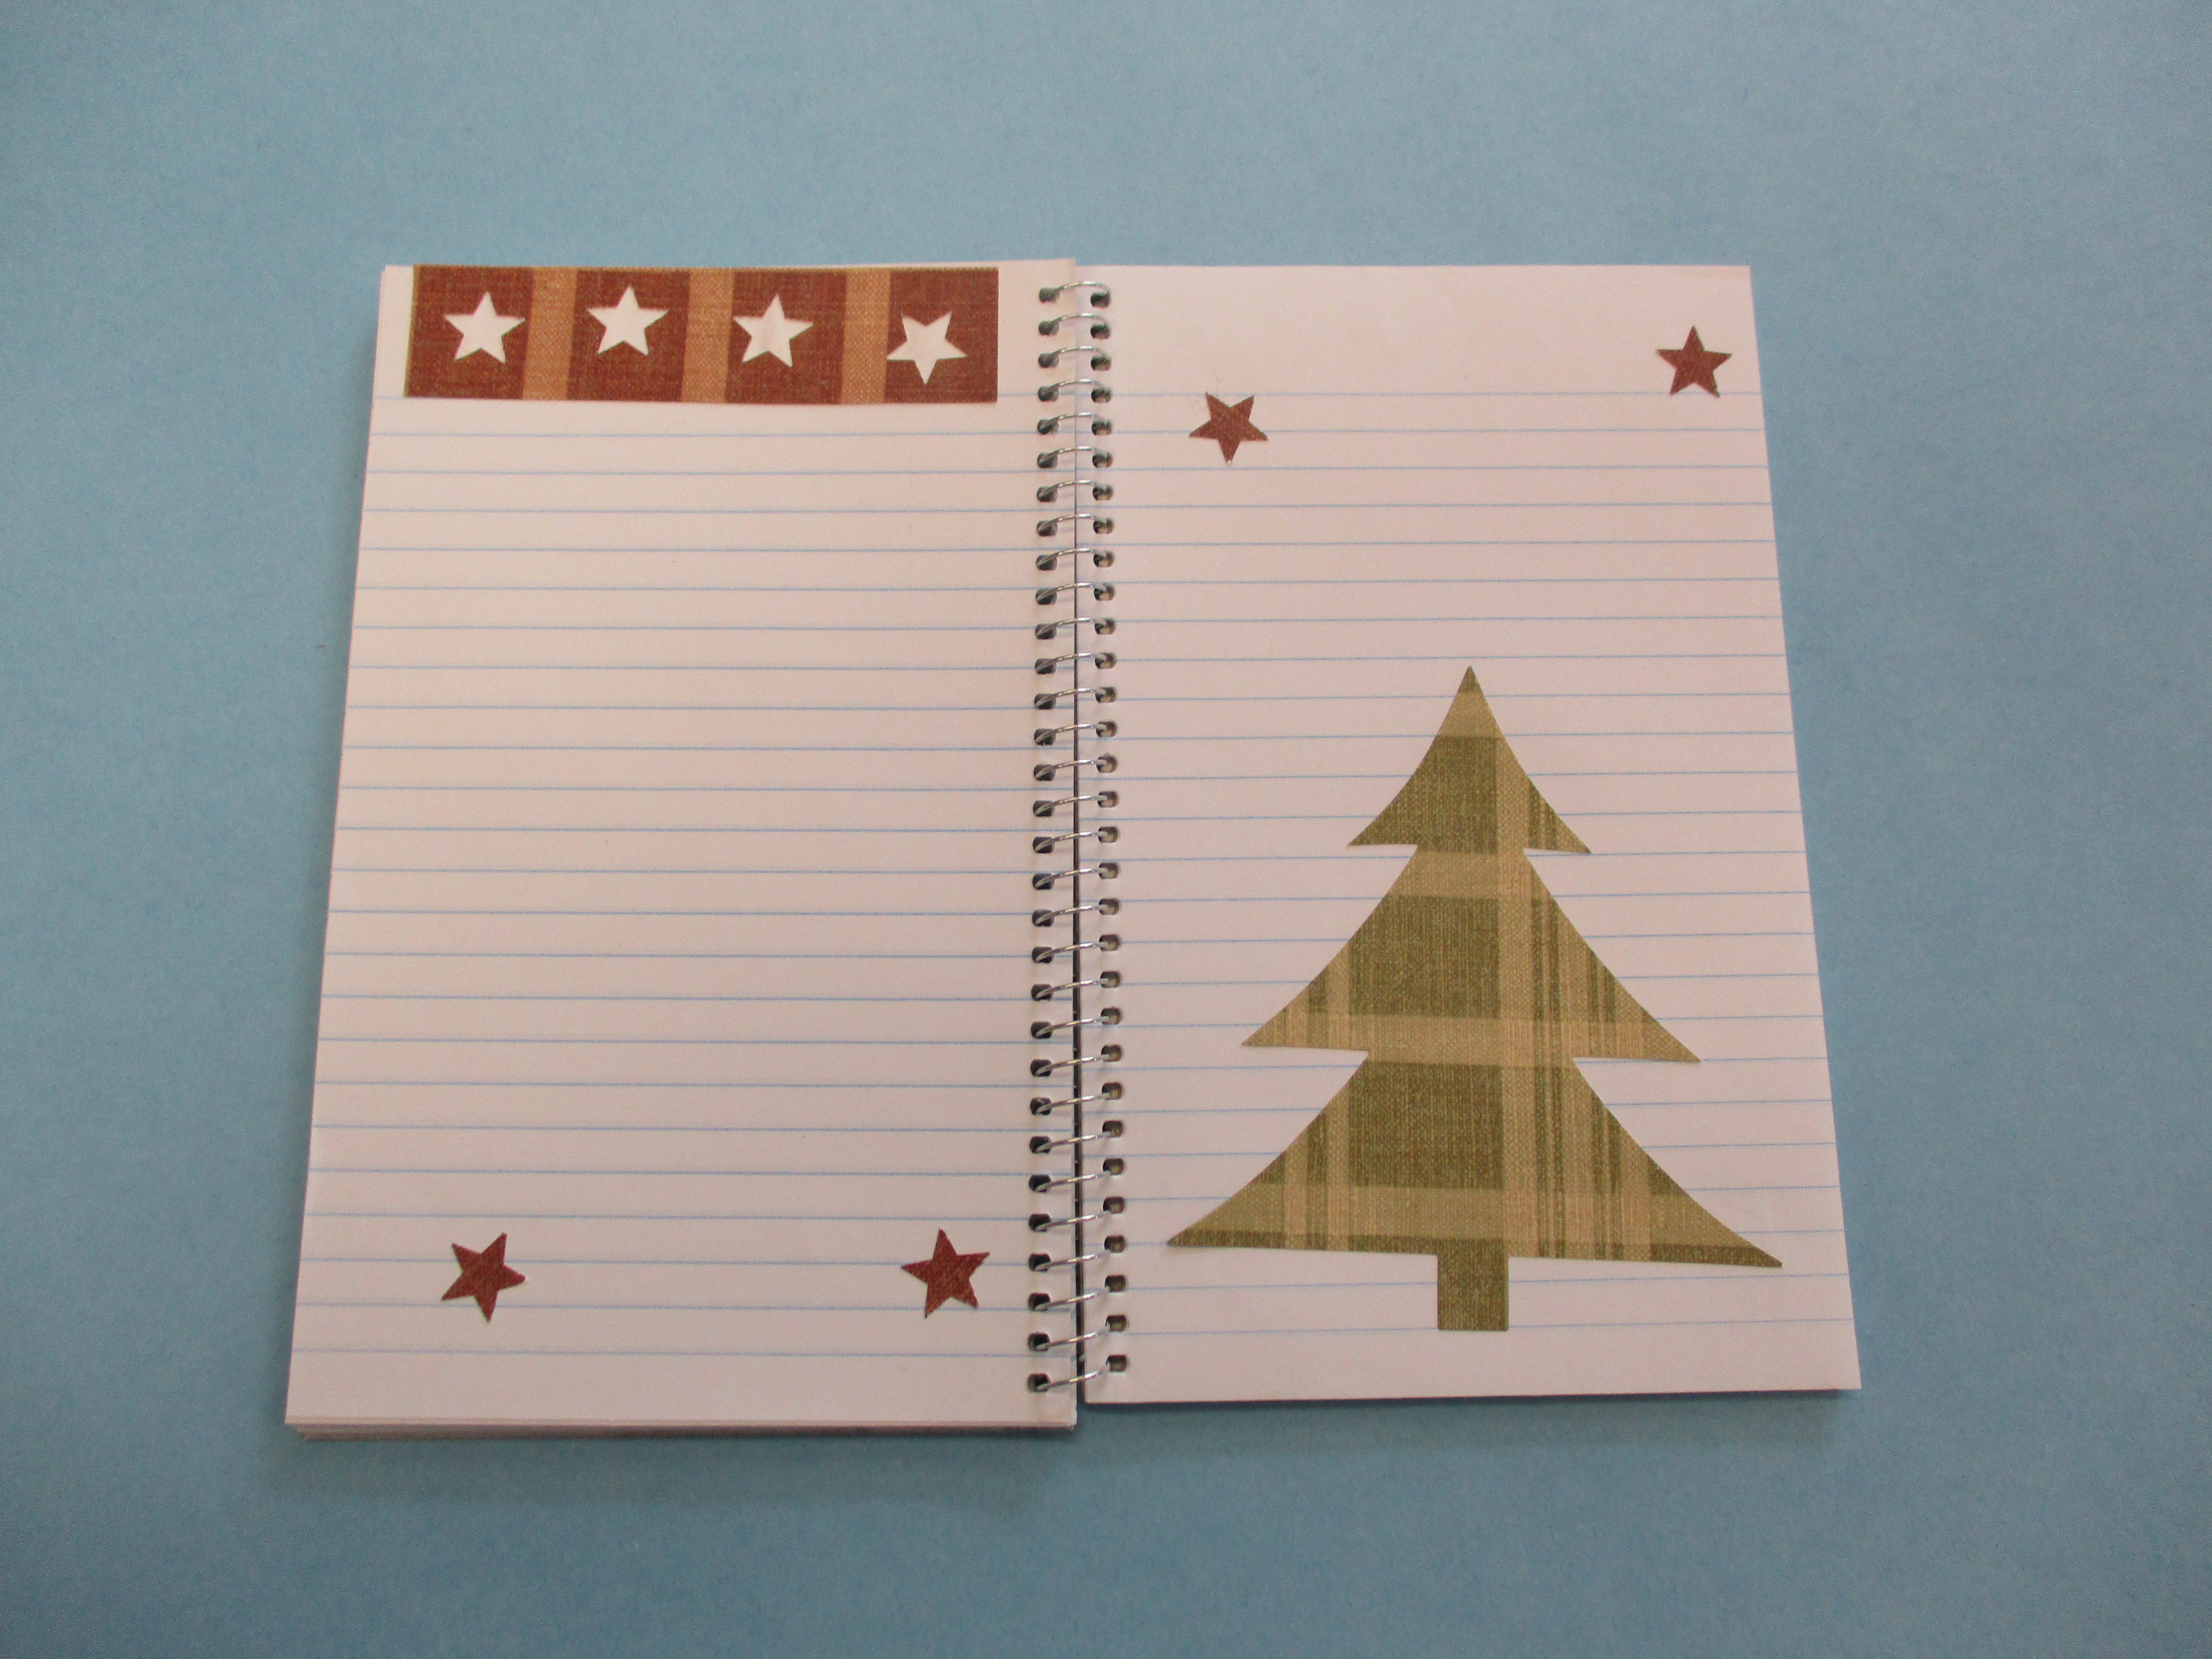 Spiral notebook open with stars and a Christmas tree inside.